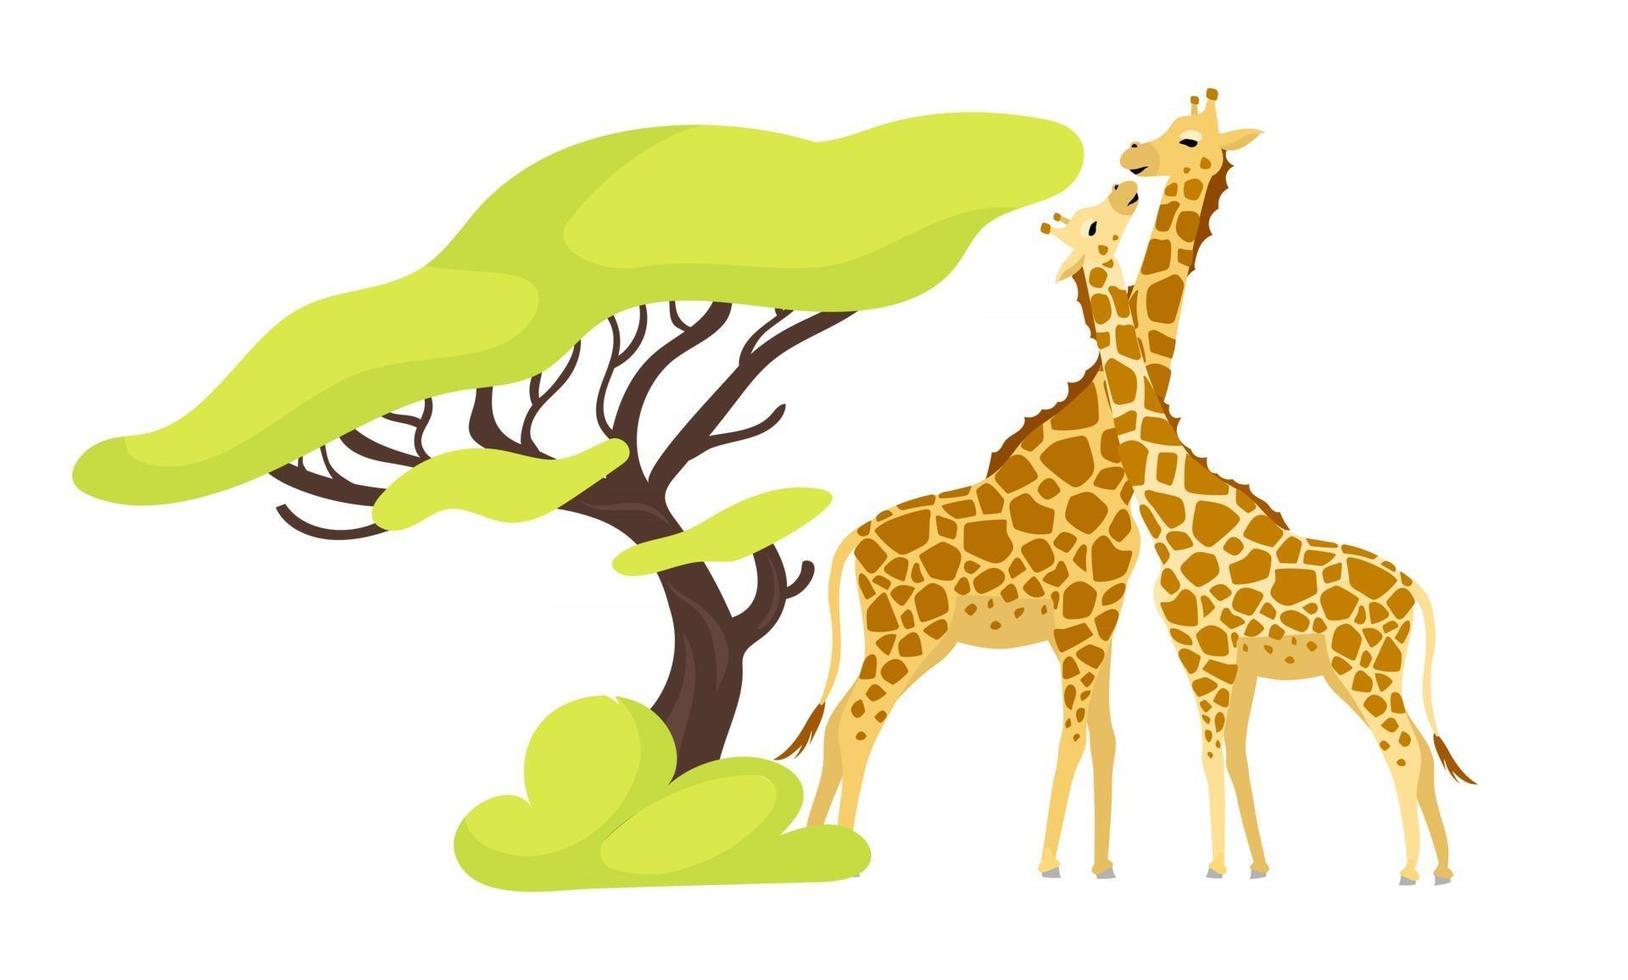 Giraffe pair flat color vector illustration. Pair of african animals near exotic tree. Flora and fauna. Green foliage. Southern creature isolated cartoon character on white background